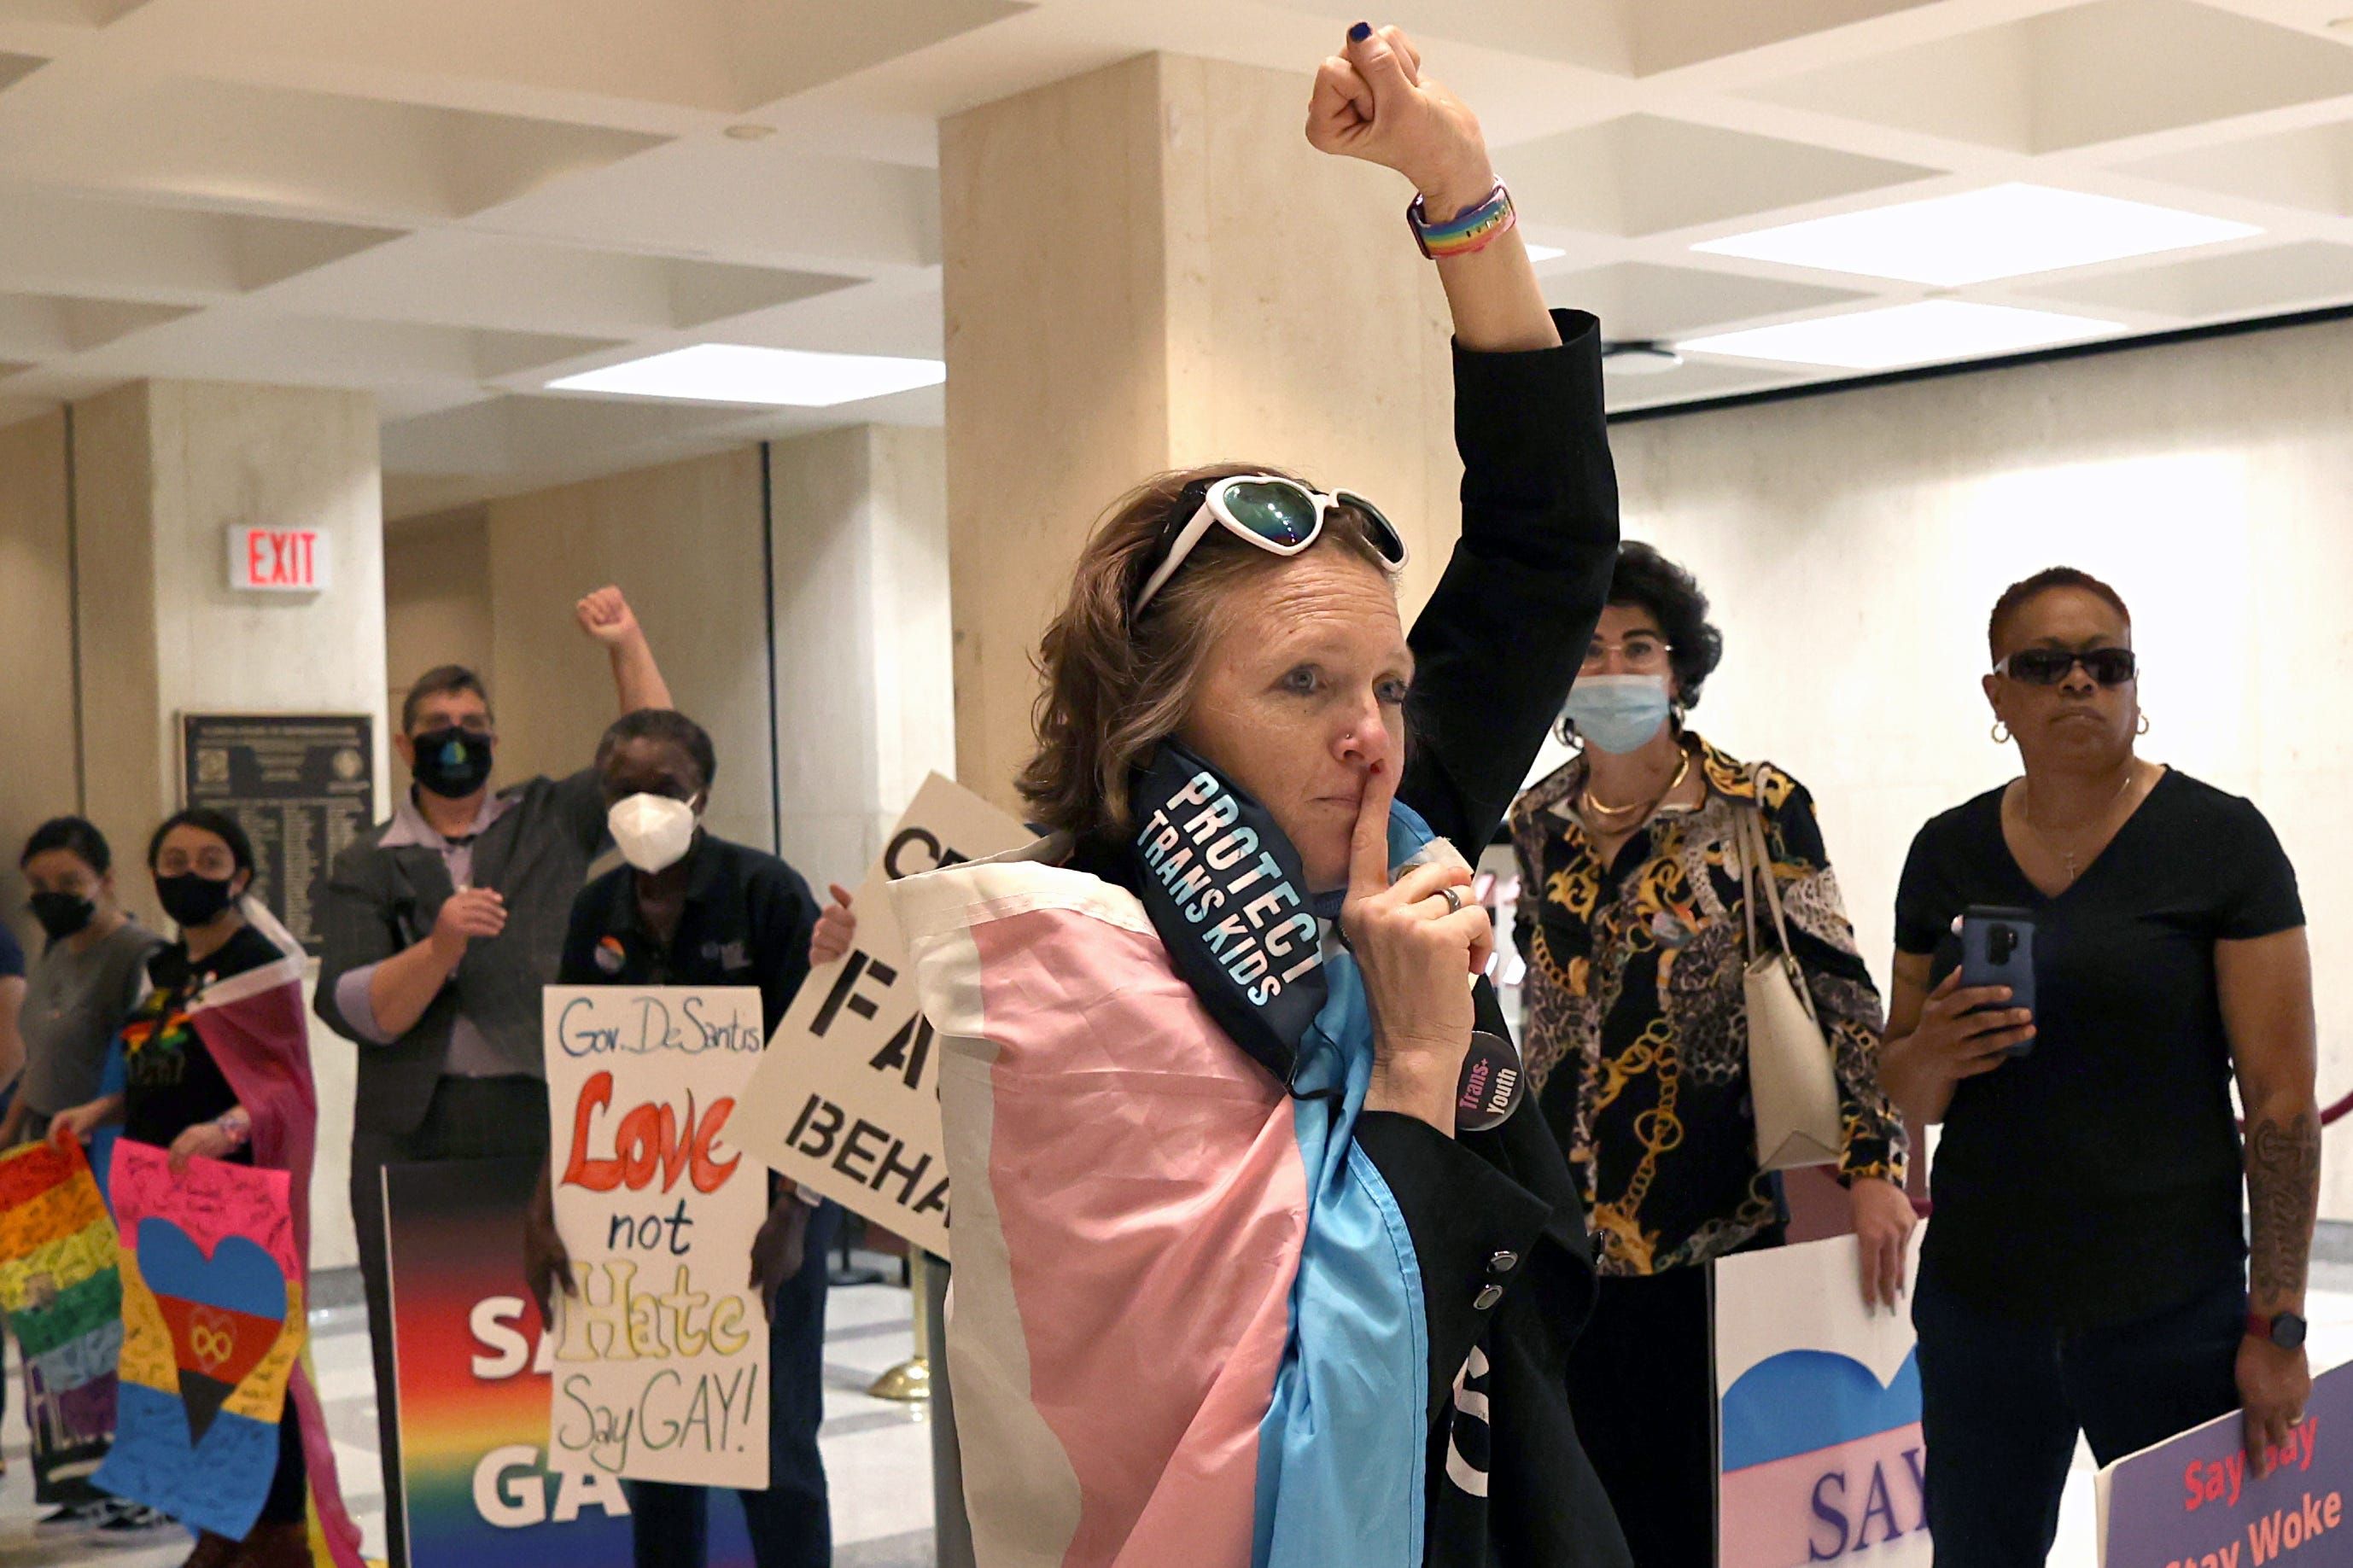 A person wrapped in the trans flag holds a finger to their lips and their fist in the air.